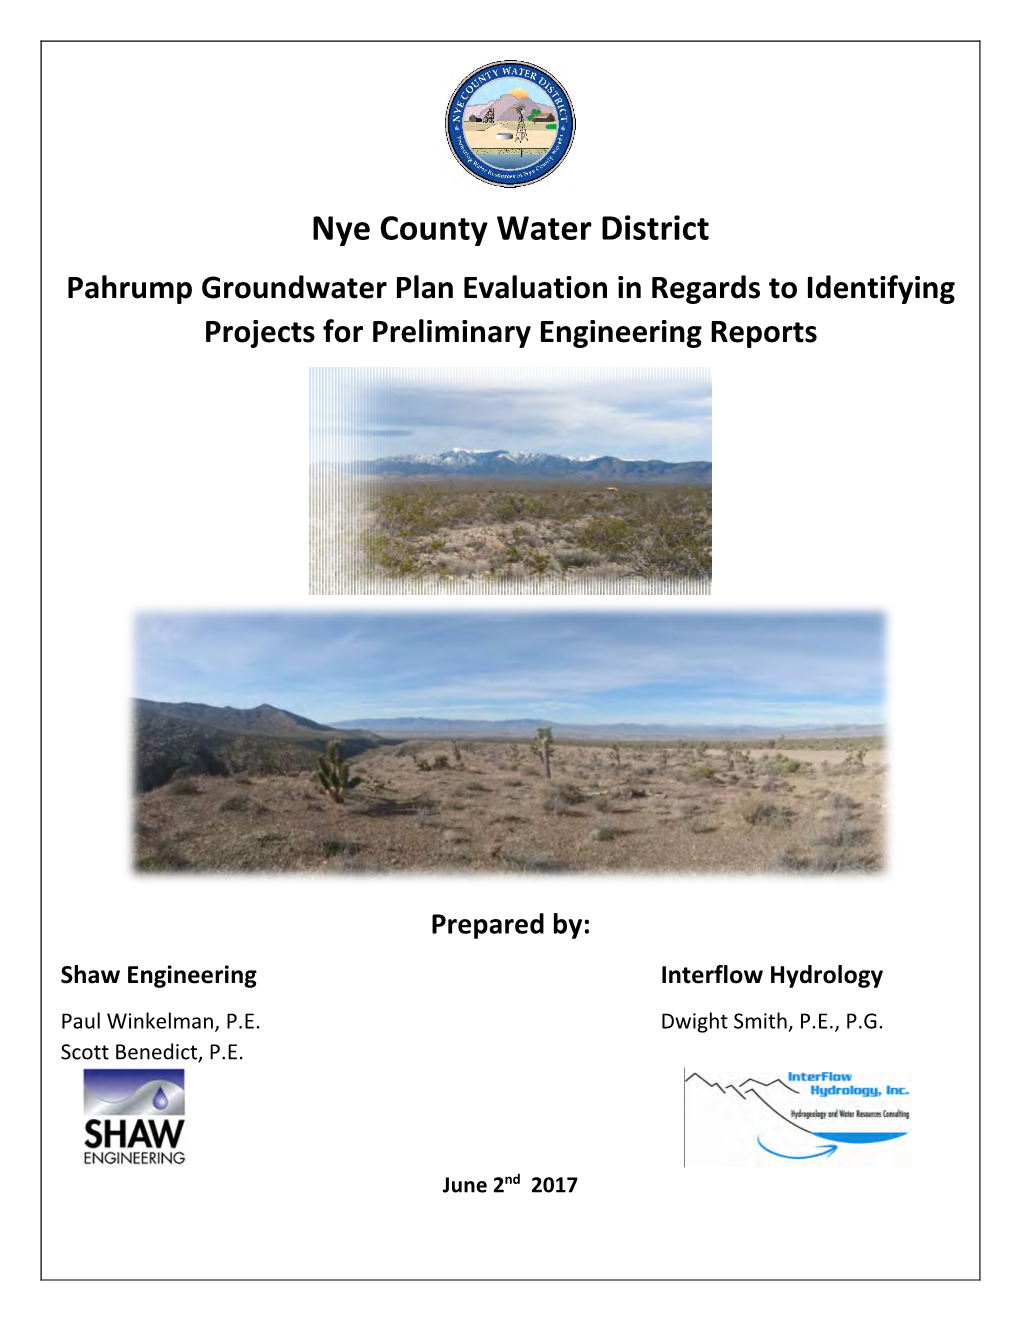 Pahrump Groundwater Plan Evaluation in Regards to Identifying Projects for Preliminary Engineering Reports